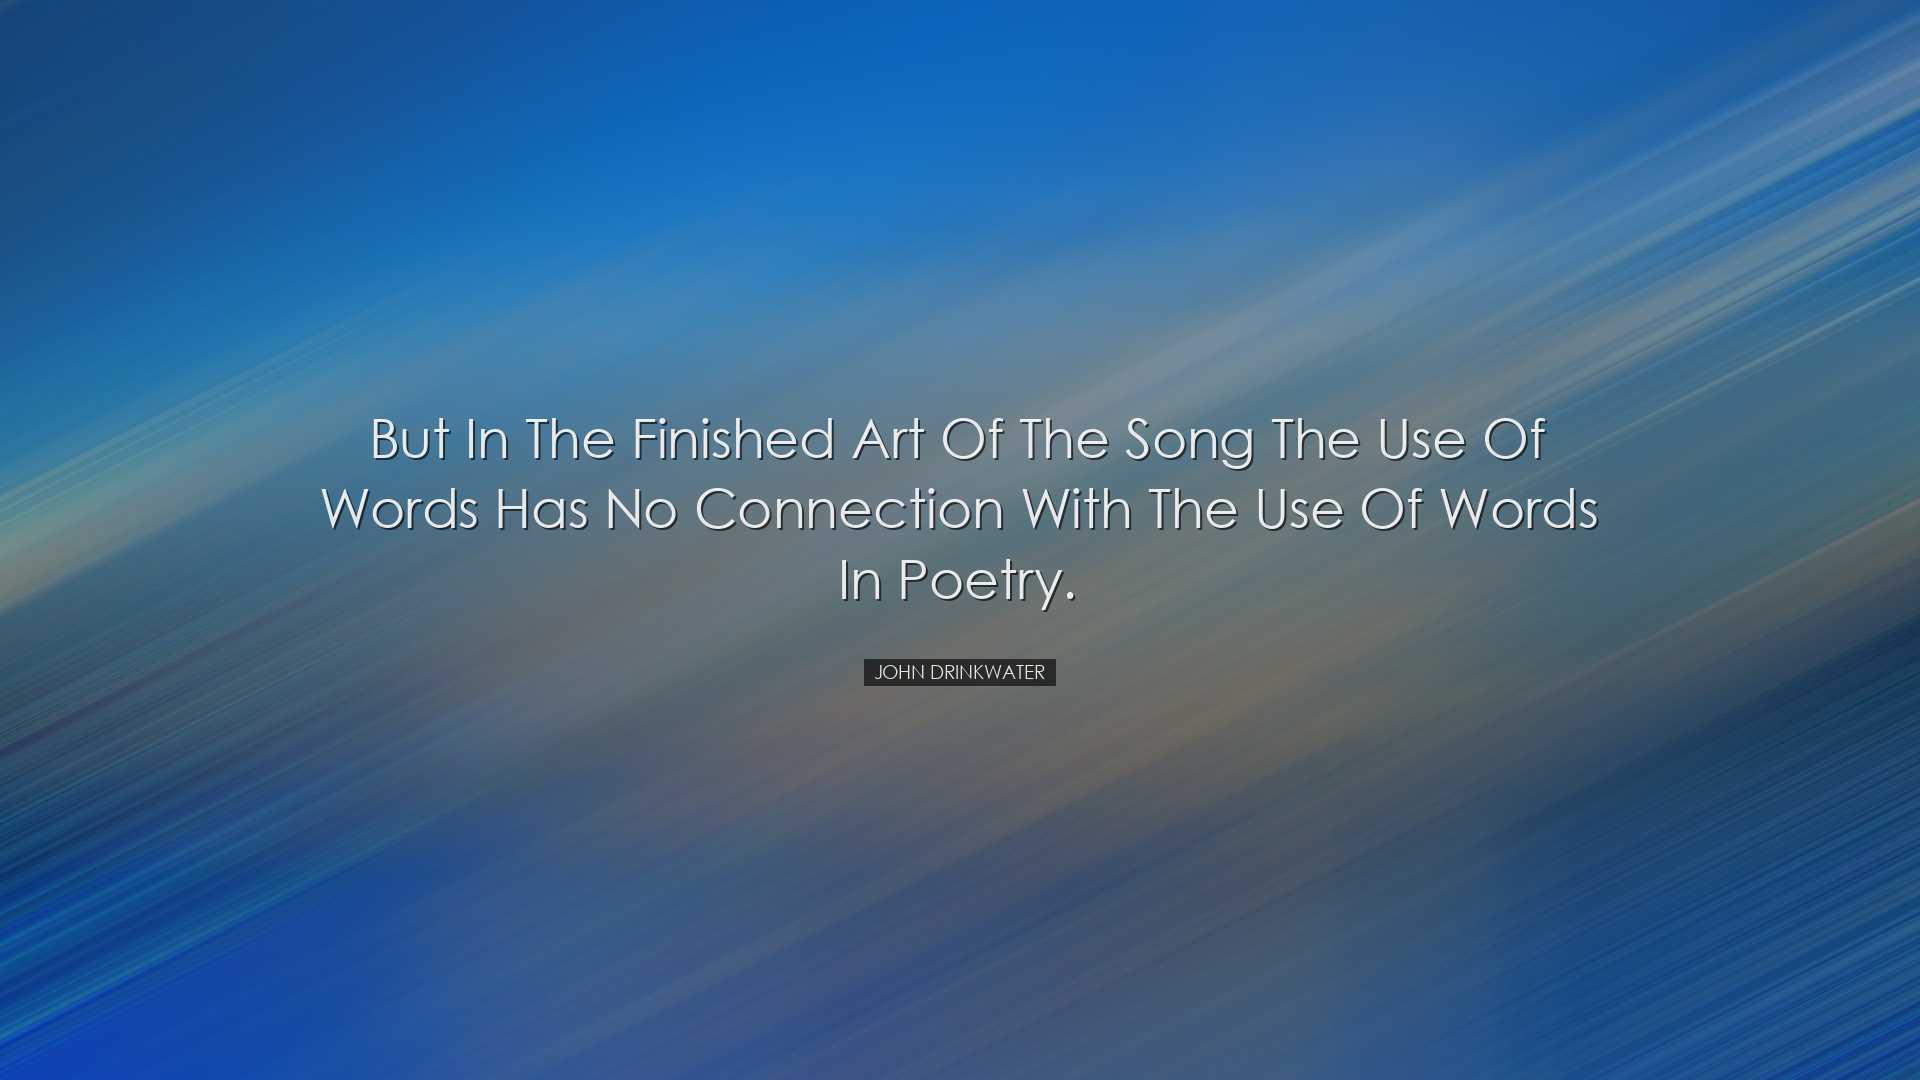 But in the finished art of the song the use of words has no connec